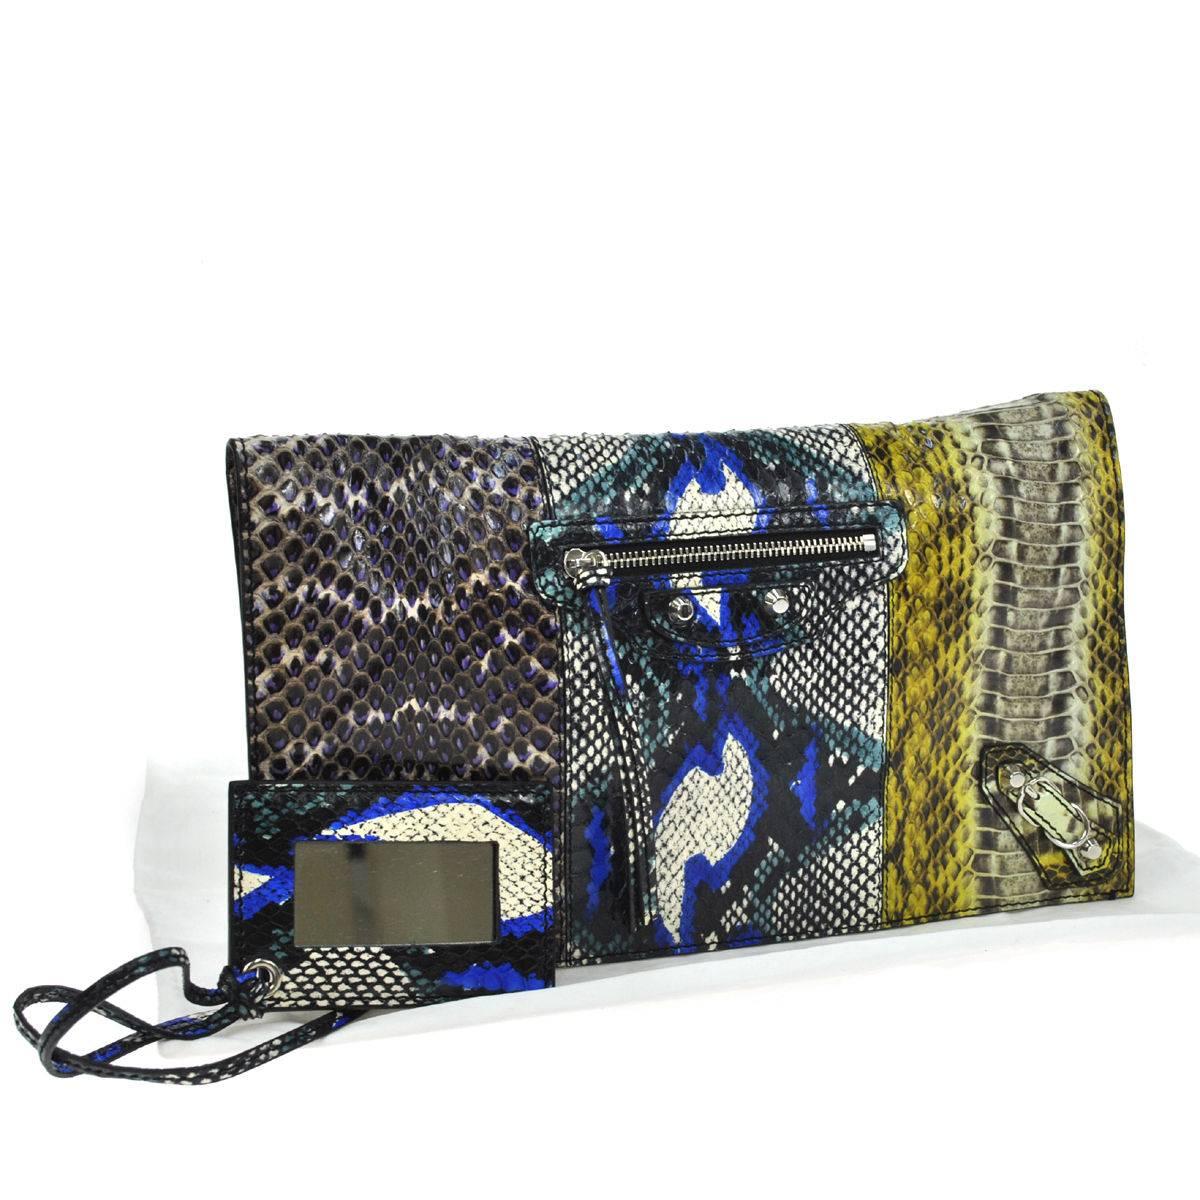 Balenciaga Multi Color Snakeskin Fold Over Envelope Evening Flap Clutch Bag

Python
Silver tone hardware
Twill lining
Made in Italy
Measures 11